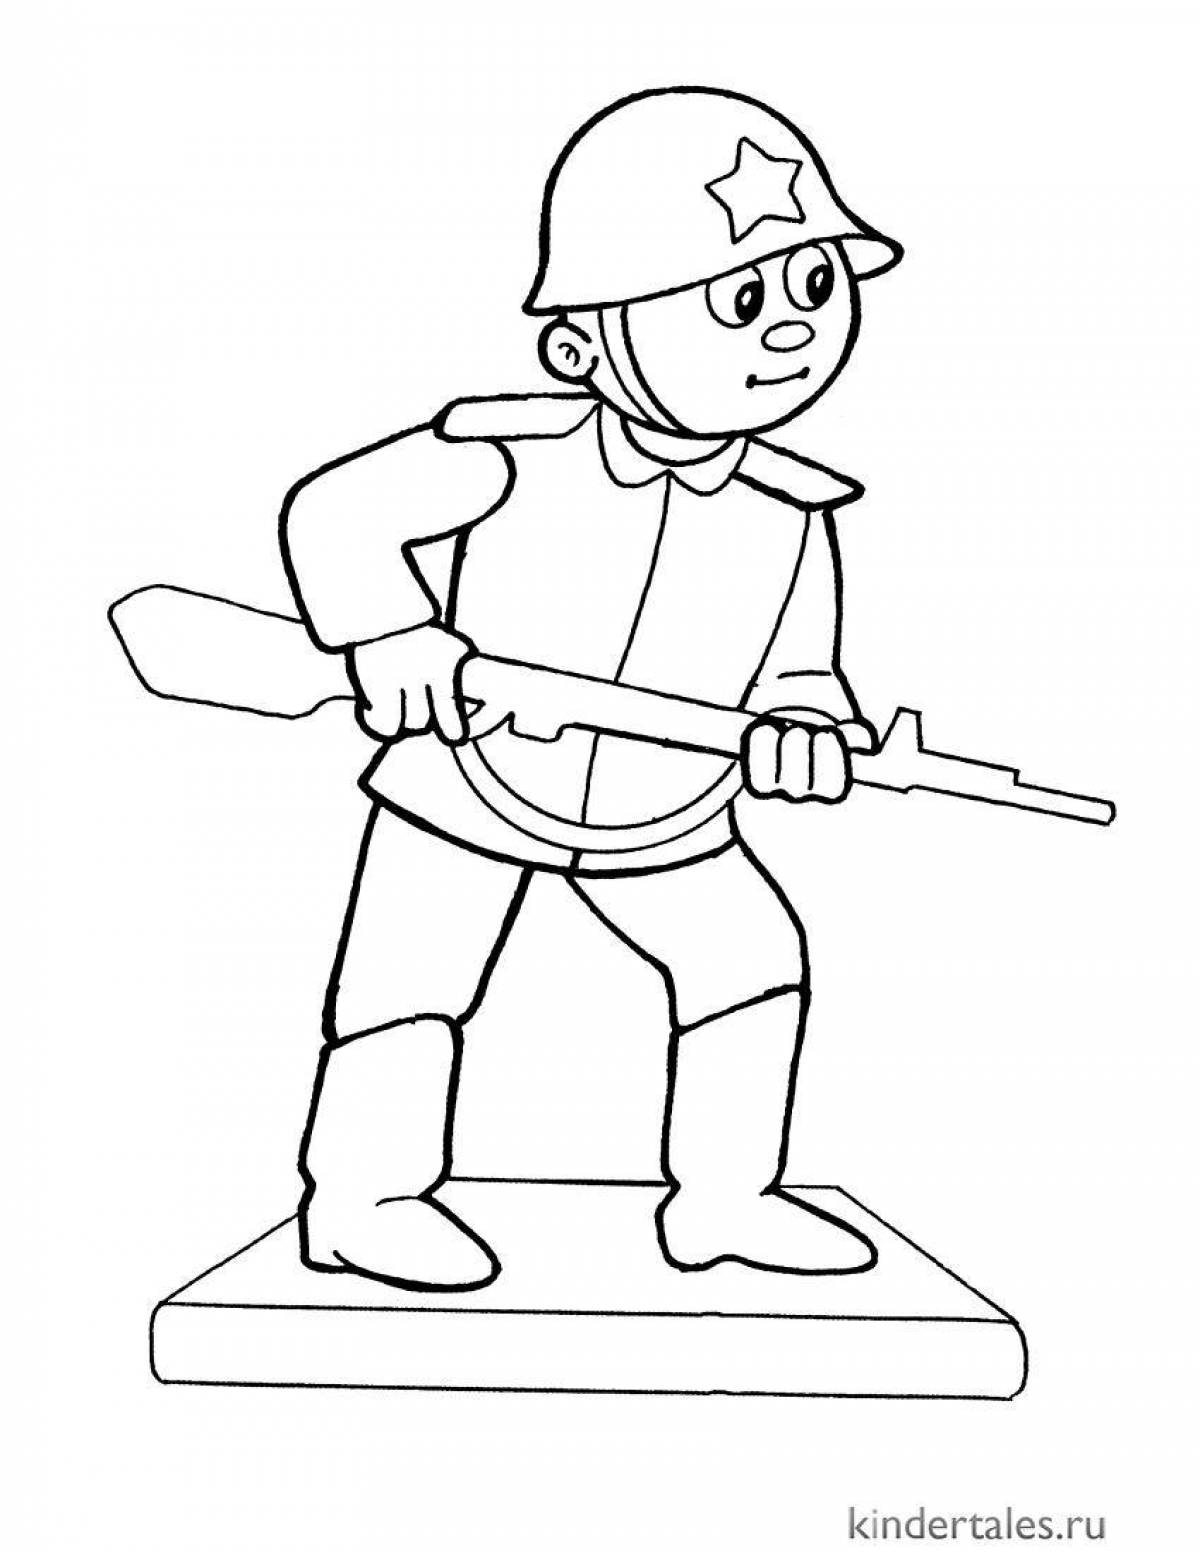 Brave soldier coloring book